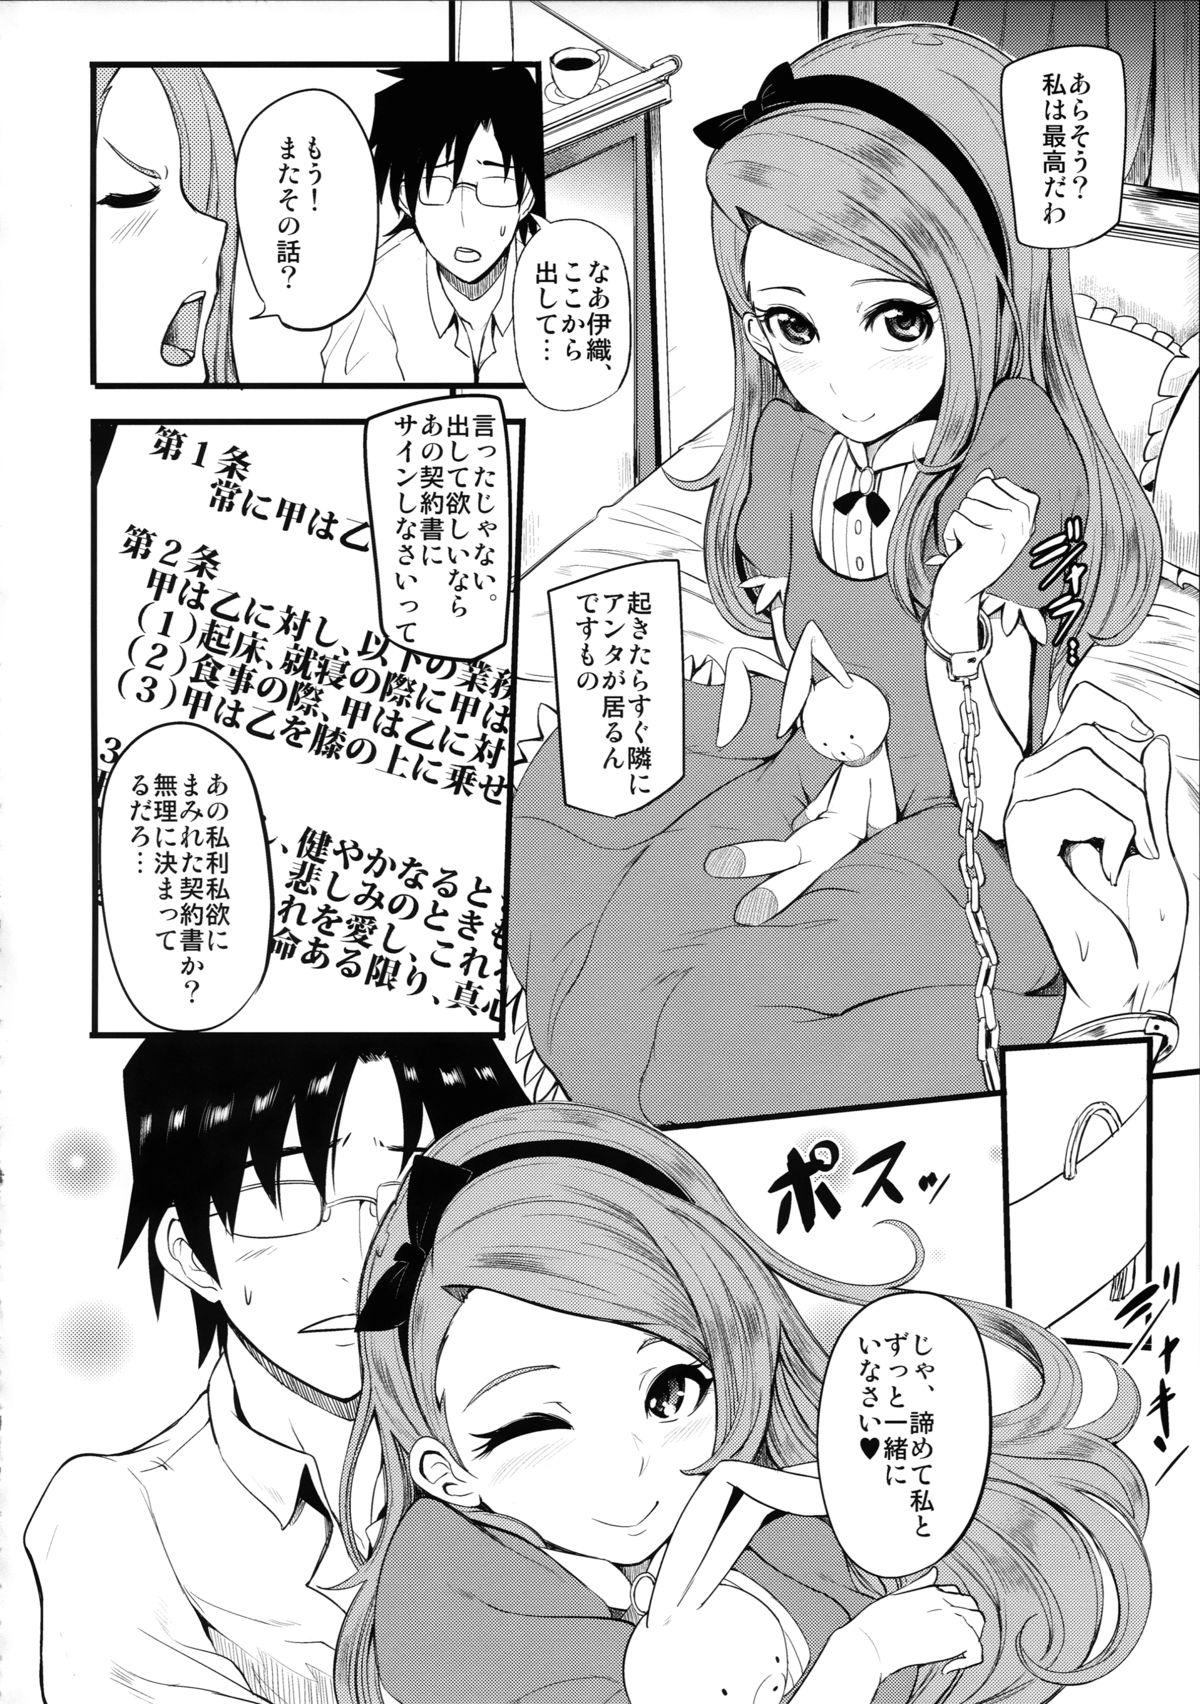 Kiss THE YANDEREM@STER - The idolmaster White Chick - Page 4